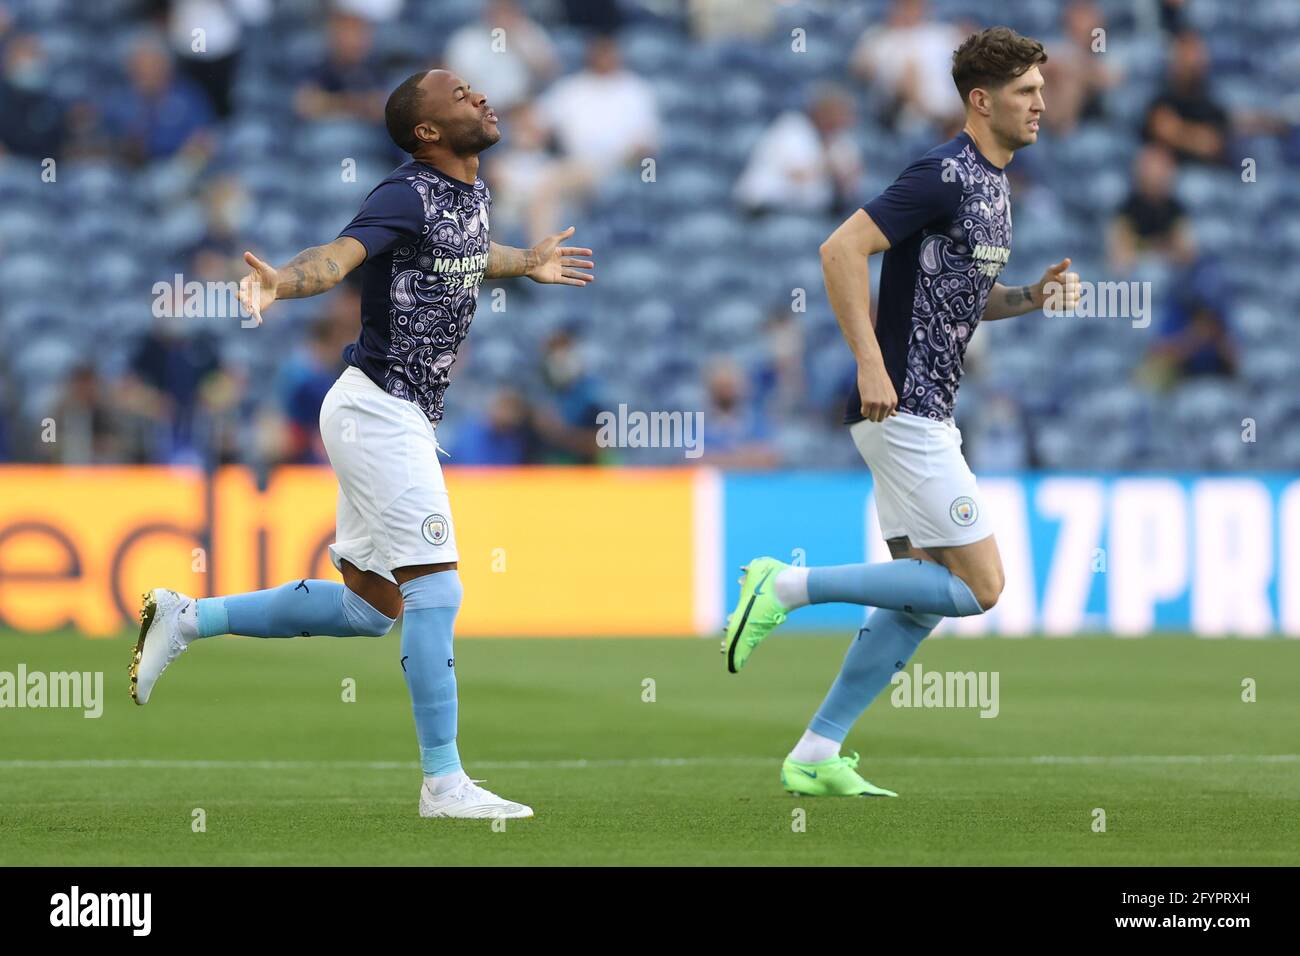 PORTO, PORTUGAL - MAY 29: Raheem Sterling [left] and John Stones [right] of Manchester City before the UEFA Champions League Final between Manchester City and Chelsea FC at Estadio do Dragao on May 29, 2021 in Porto, Portugal. (Photo by MB Media) Stock Photo